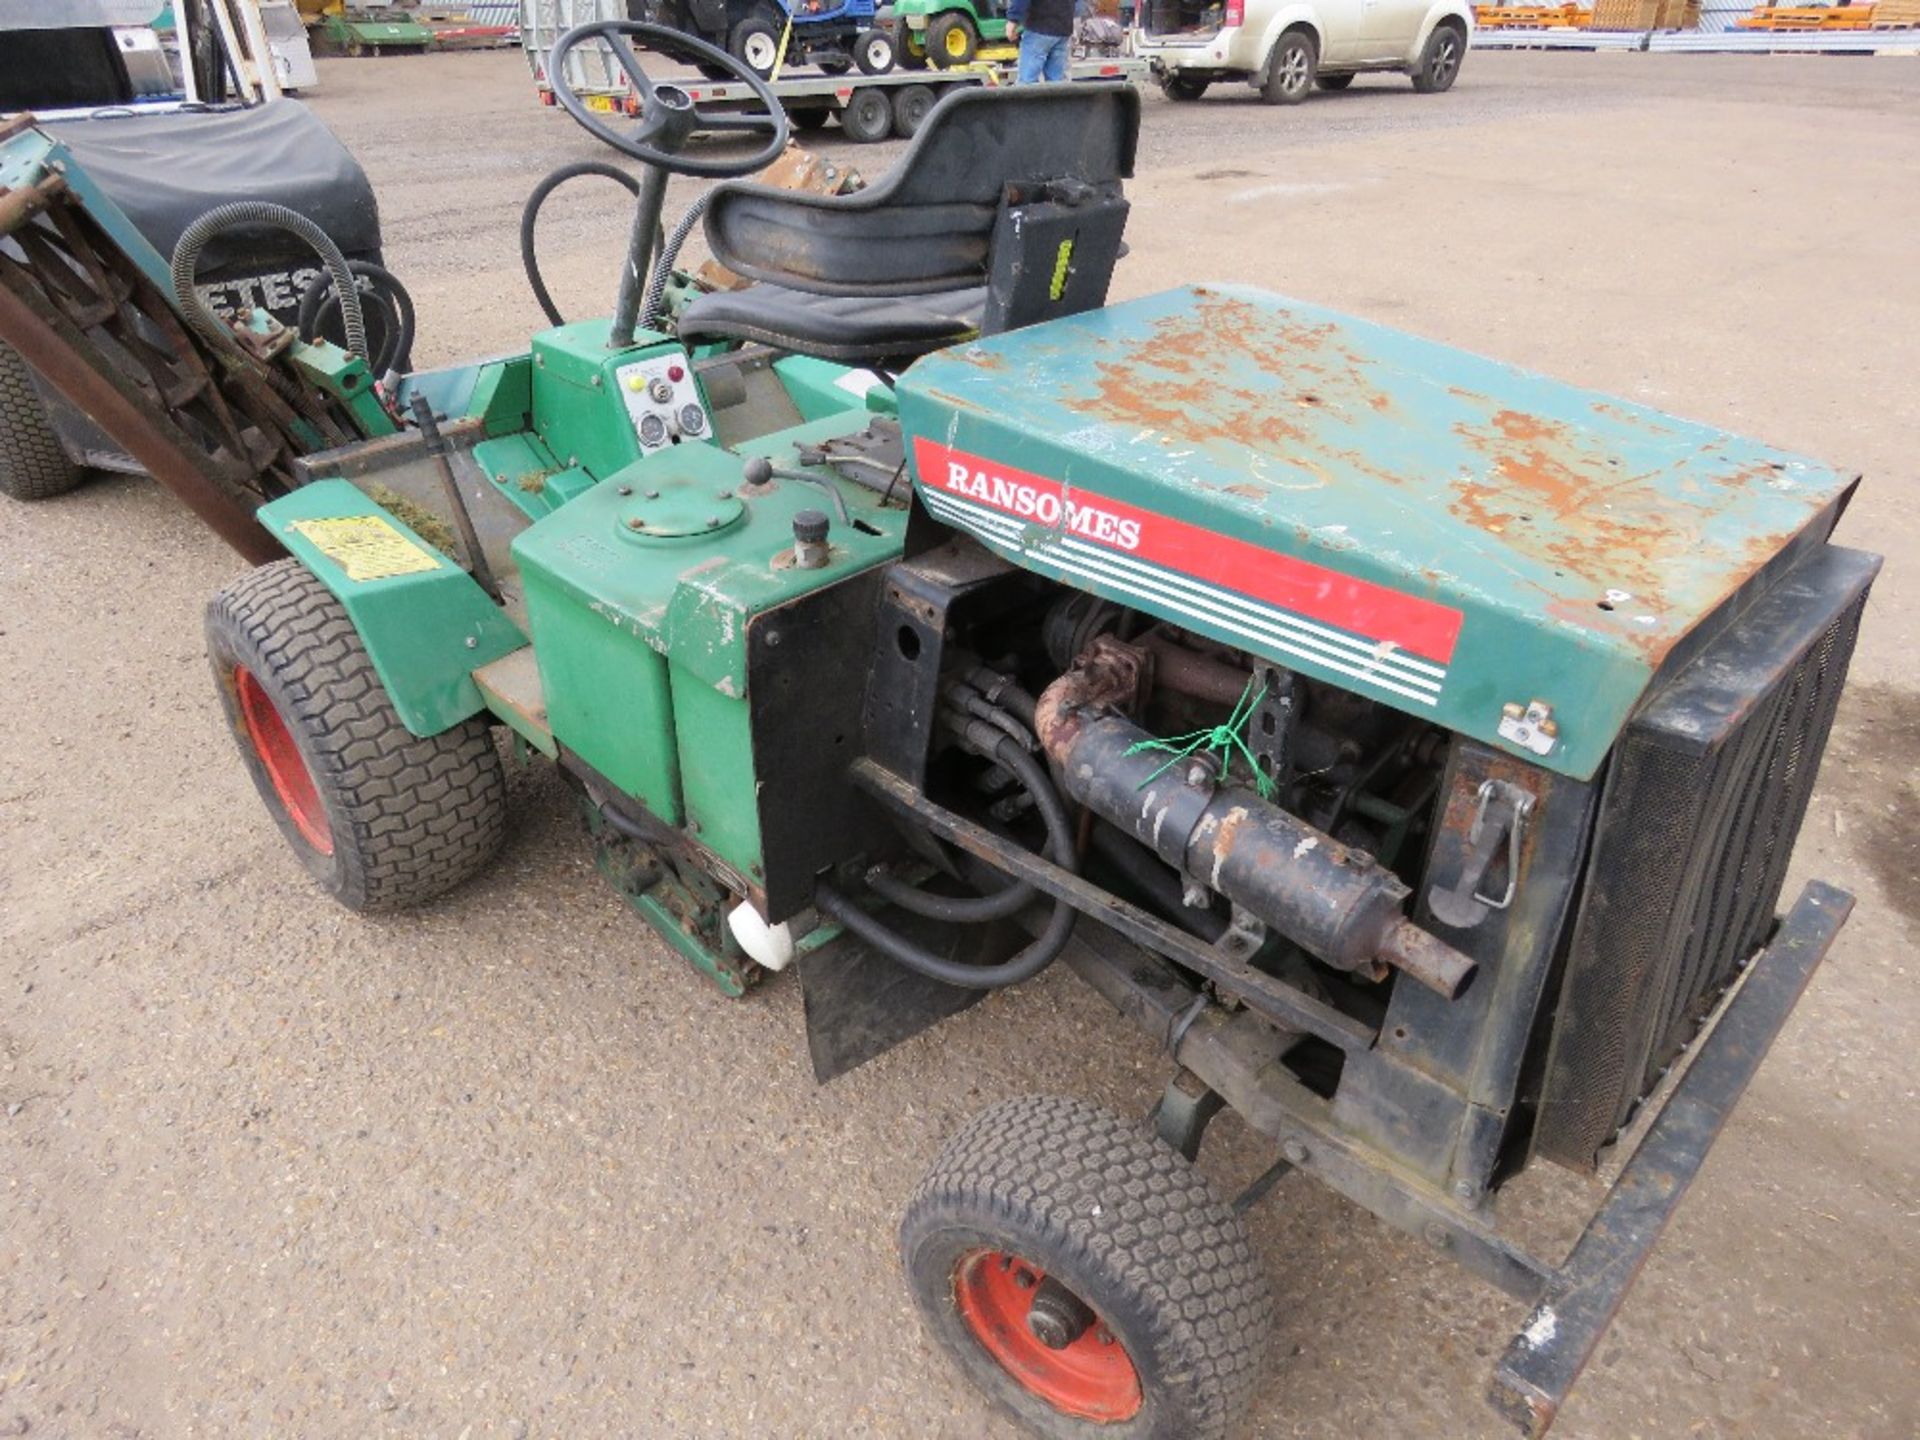 RANSOMES 213 TRIPLE MOWER WITH KUBOTA DIESEL ENGINE. WHEN TESTED WAS SEEN TO DRIVE, MOWERS TURNED AN - Image 7 of 8